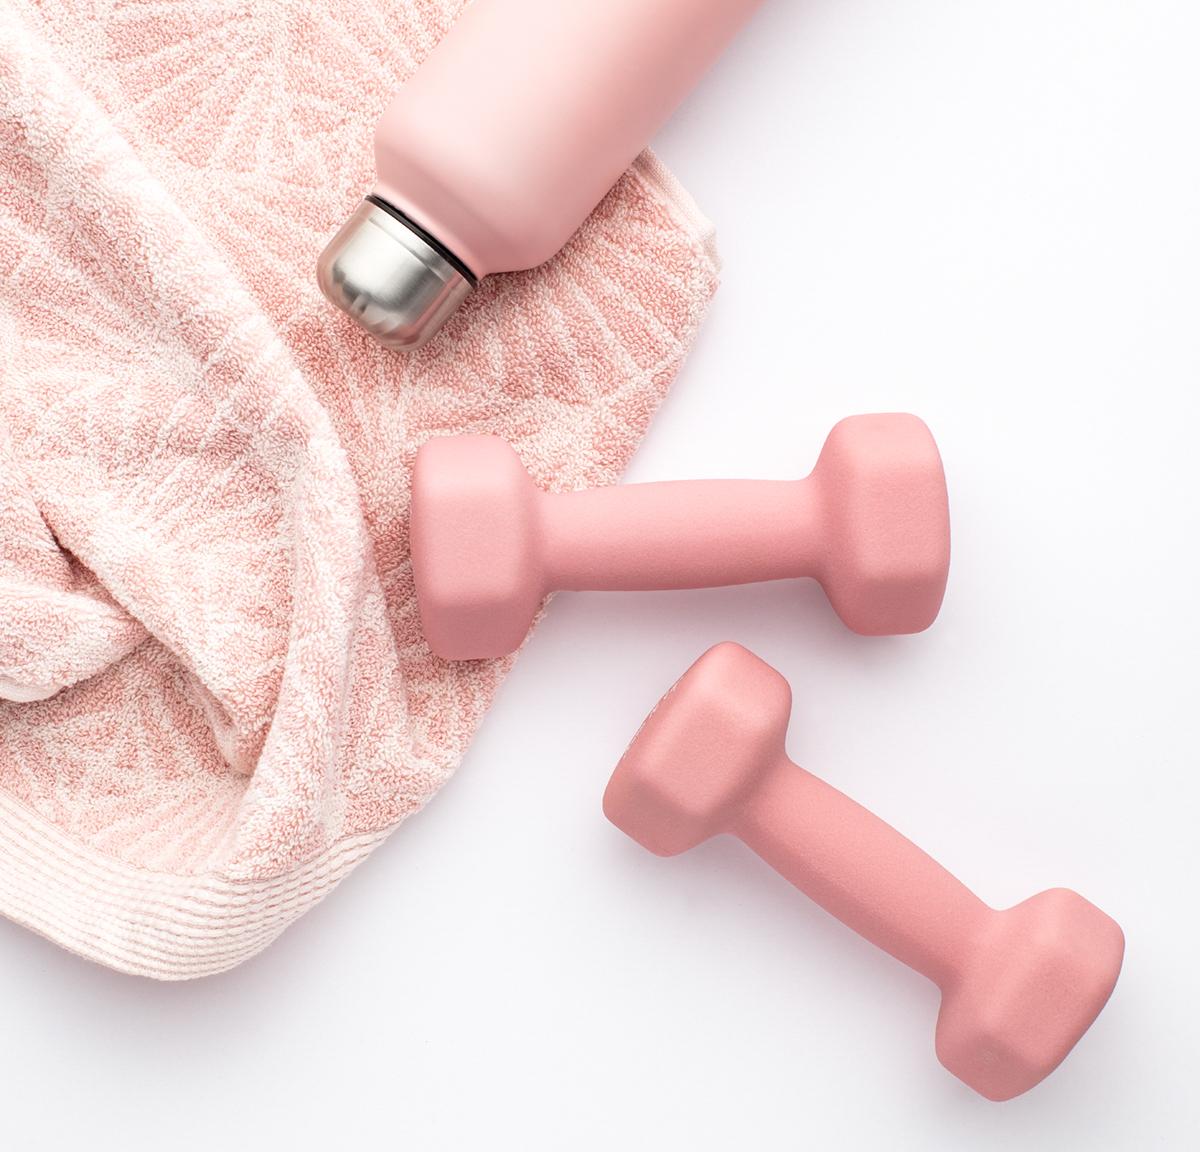 Two small pink weights with a pink towel, with a pink water bottle on a white background.